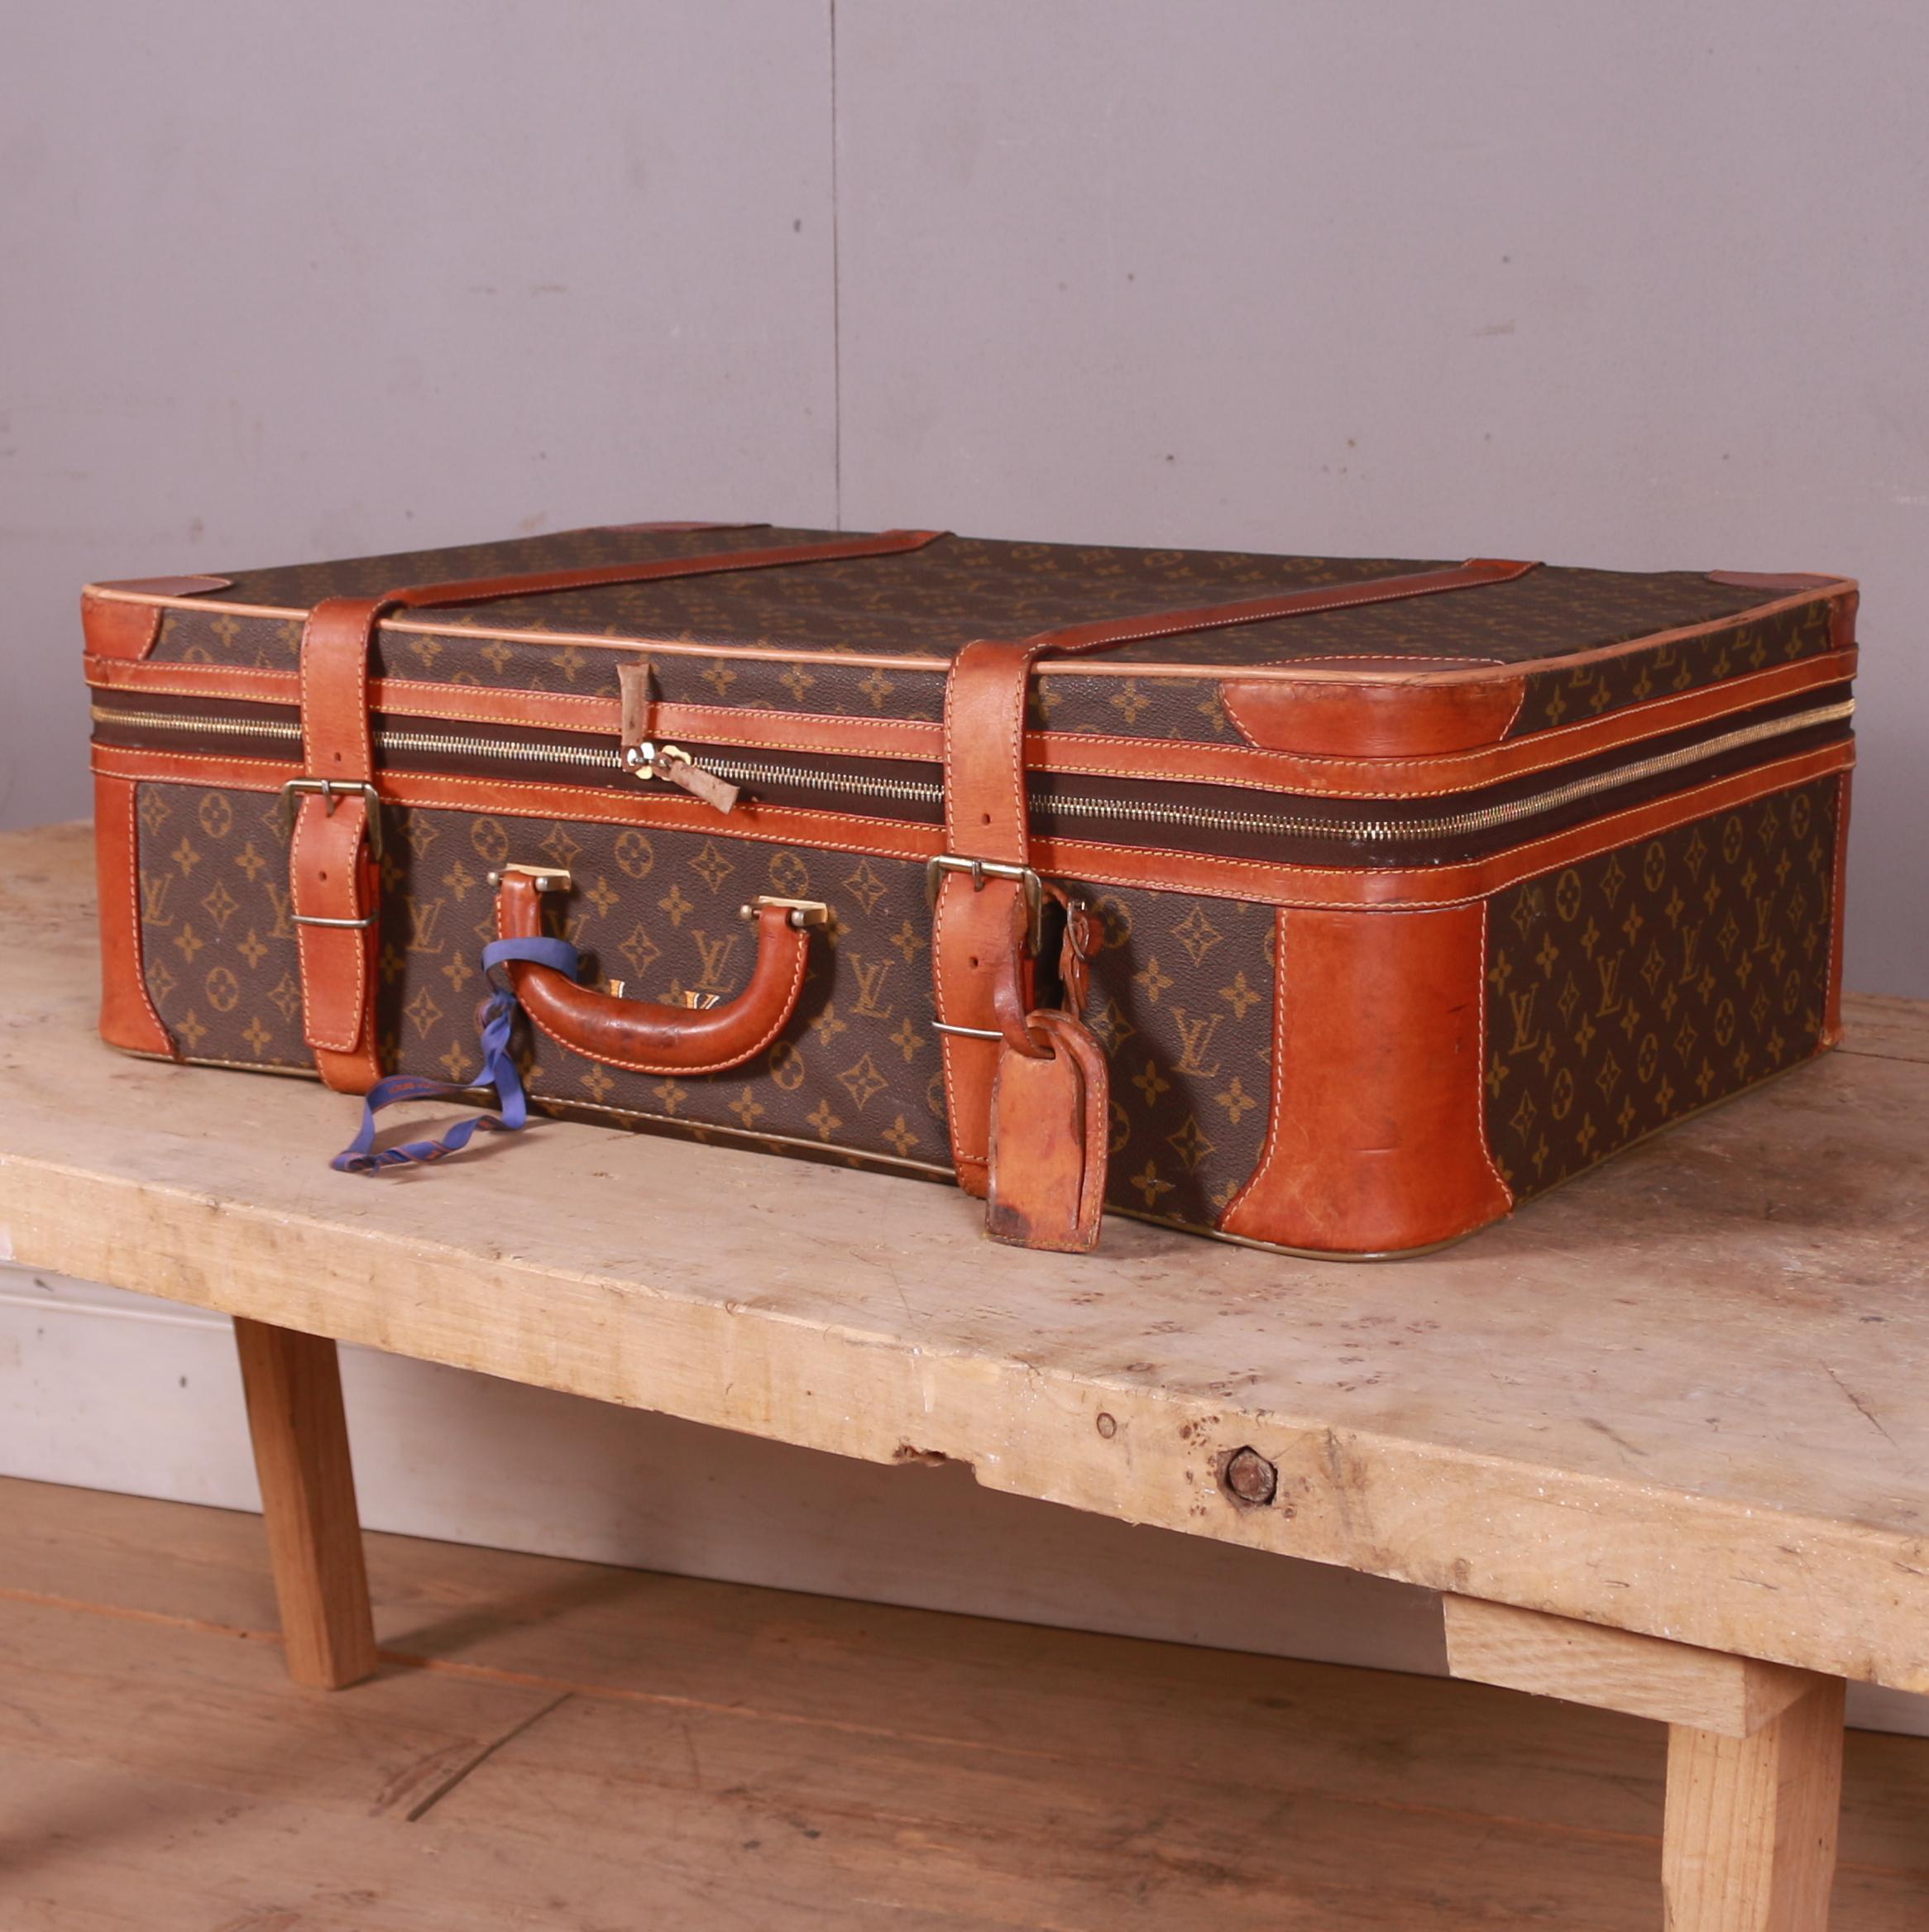 A vintage Louis Vuitton leather monogram suitcase initialed with 